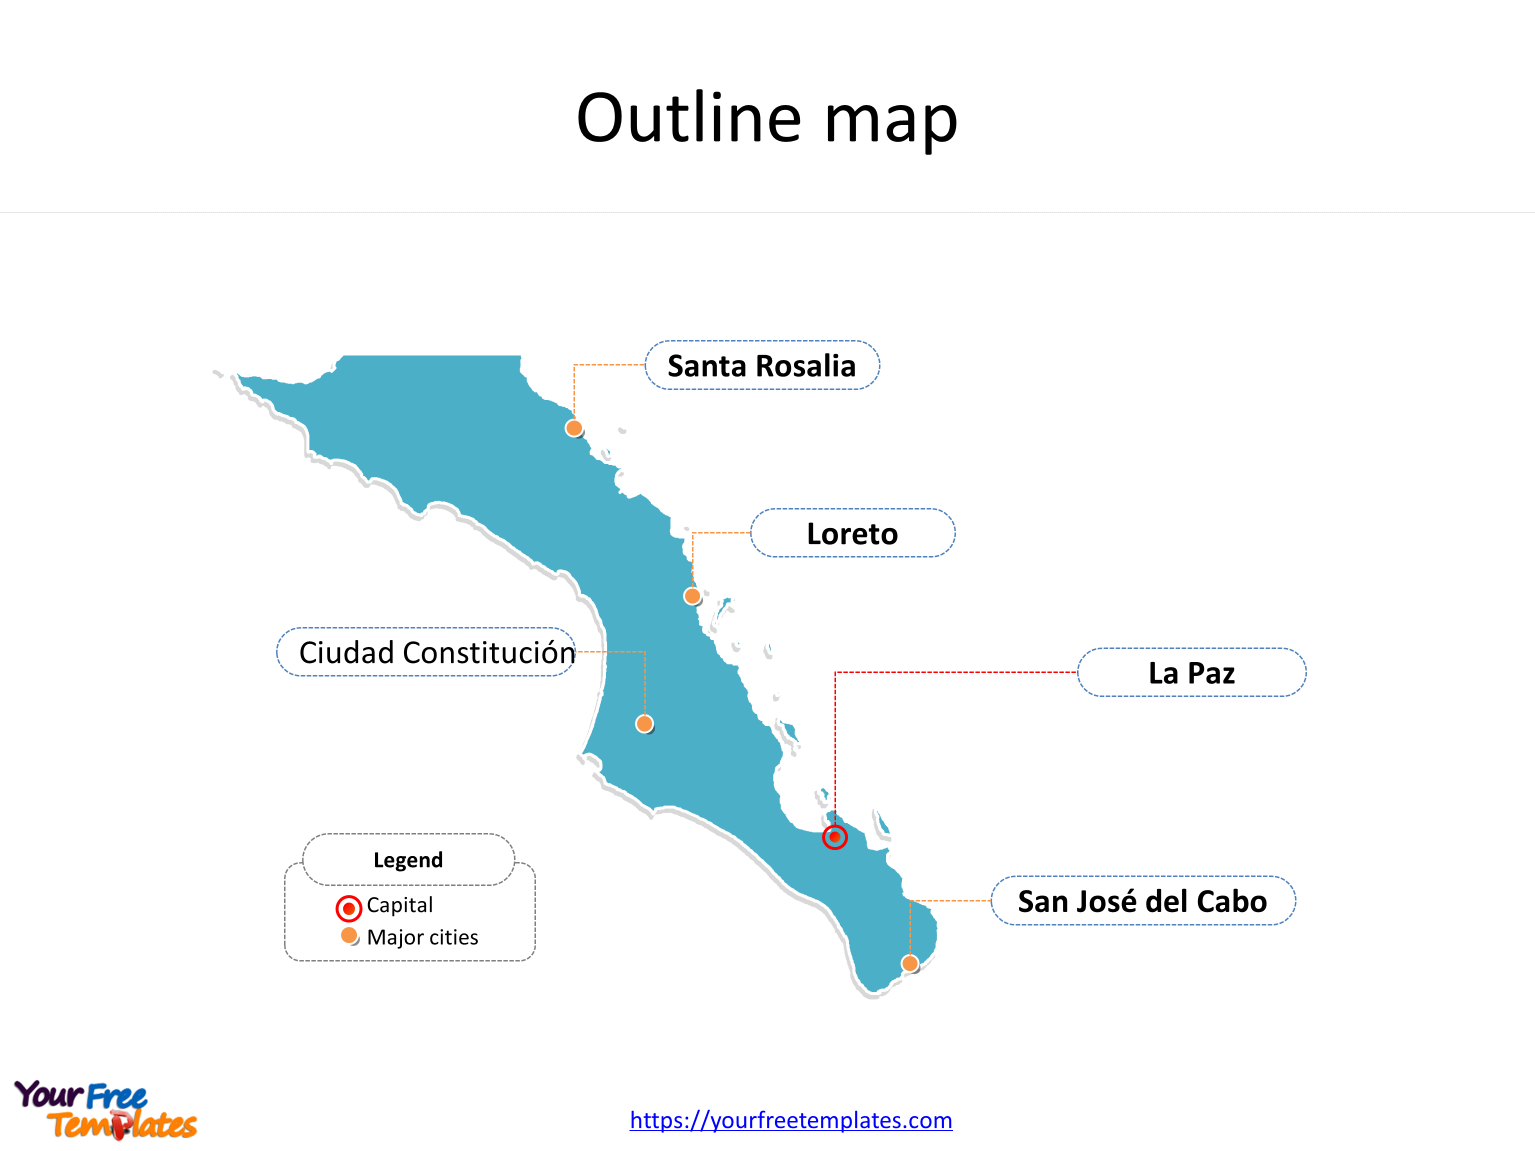 State of Mexico Baja California Sur map with outline and cities labeled on the Baja California Sur maps PowerPoint templates